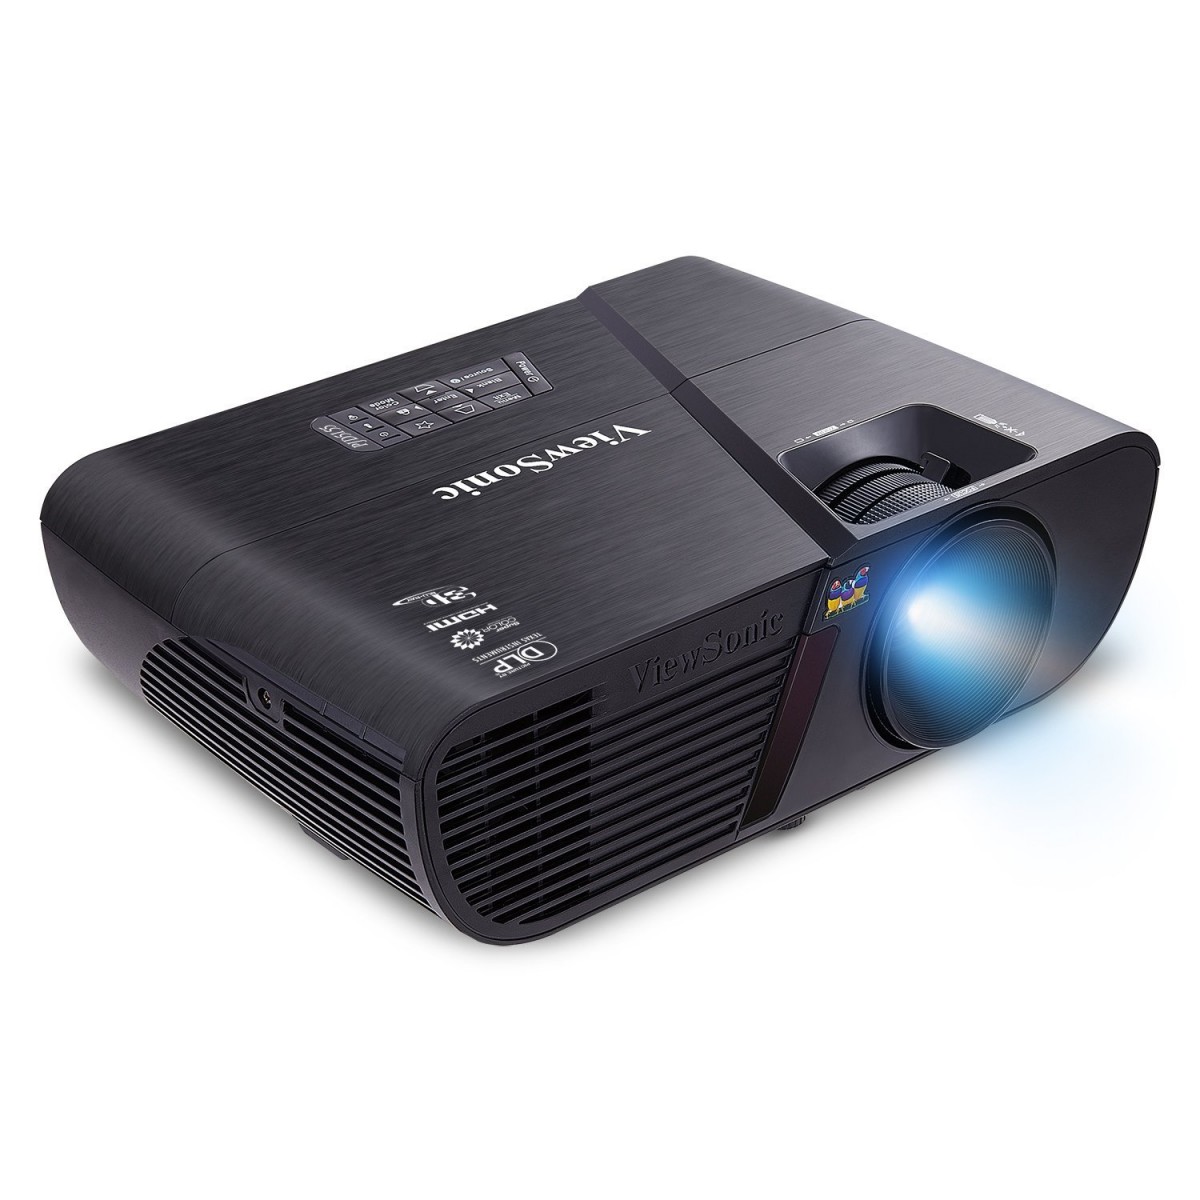 viewsonic pjd5155 projector review